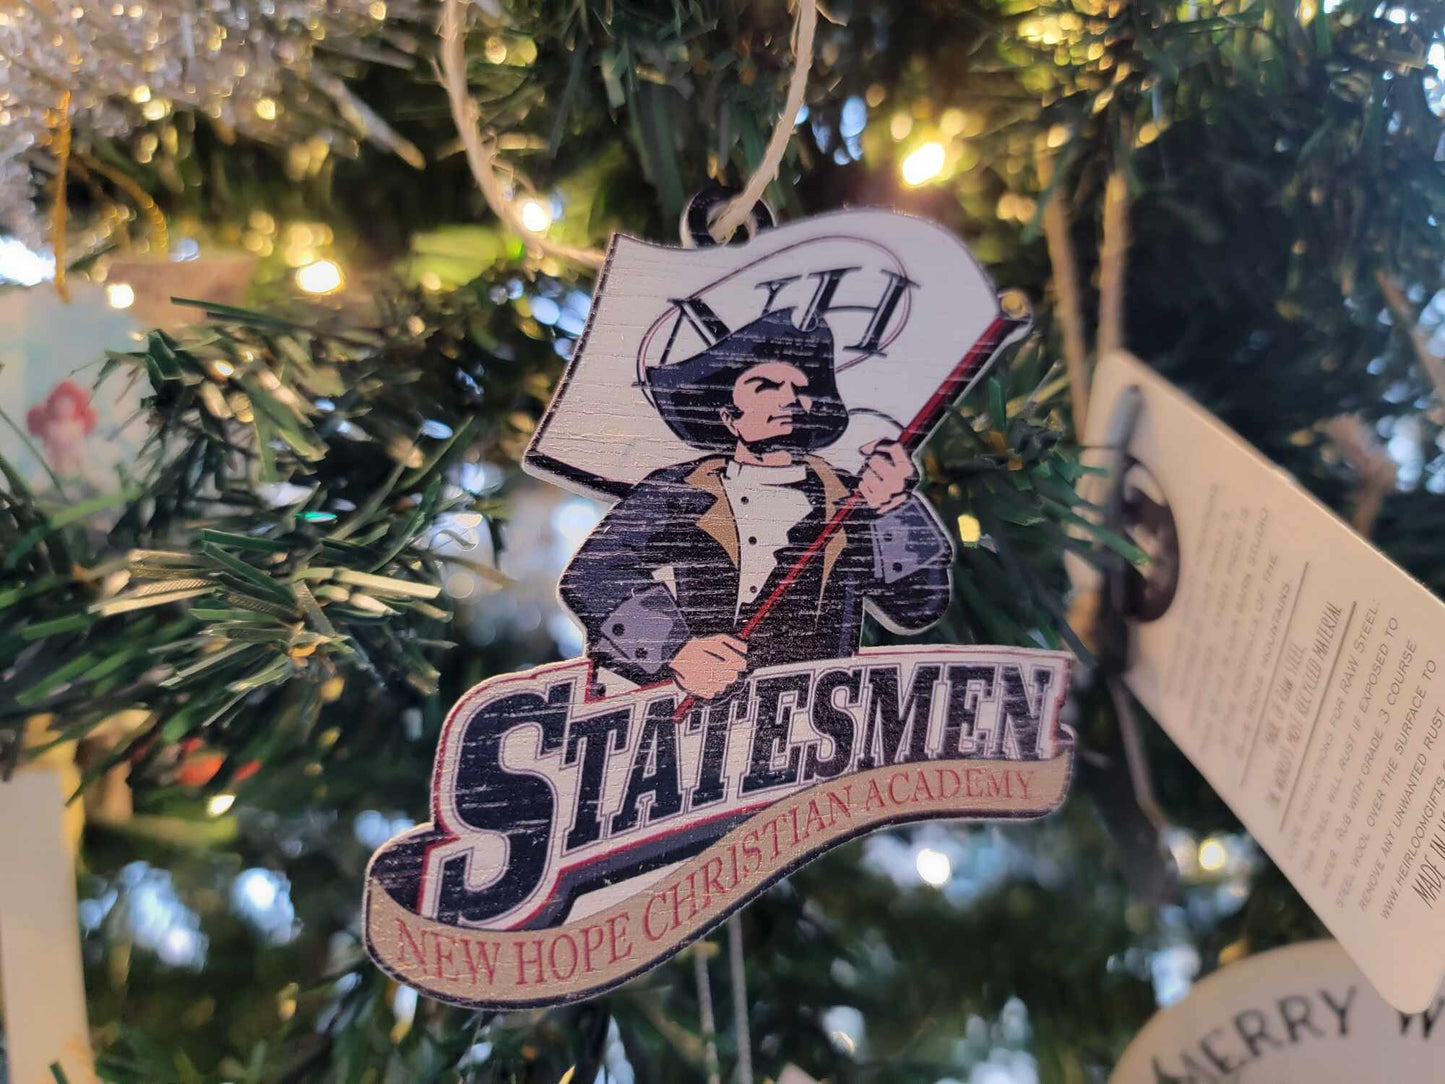 Printed Ornament Statesmen Mascot School Academy Printed Logo New Hope Keychain Decoration Décor Wood Sign Gift